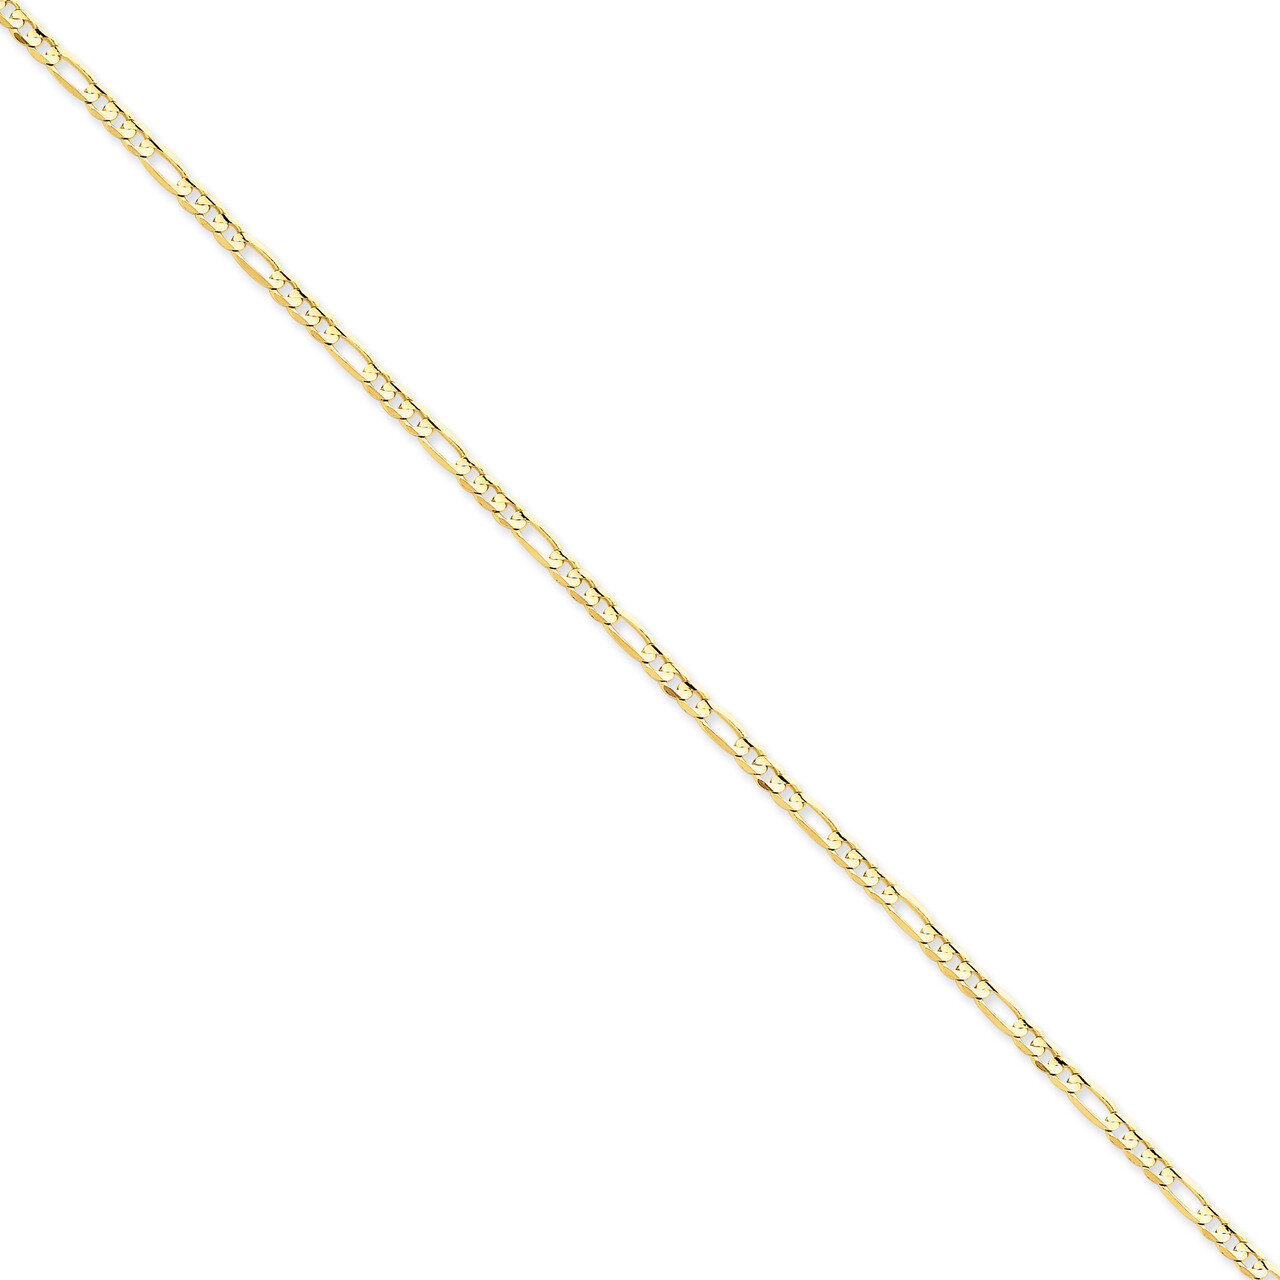 3mm Concave Open Figaro Chain 7 Inch 14k Gold LFG080-7